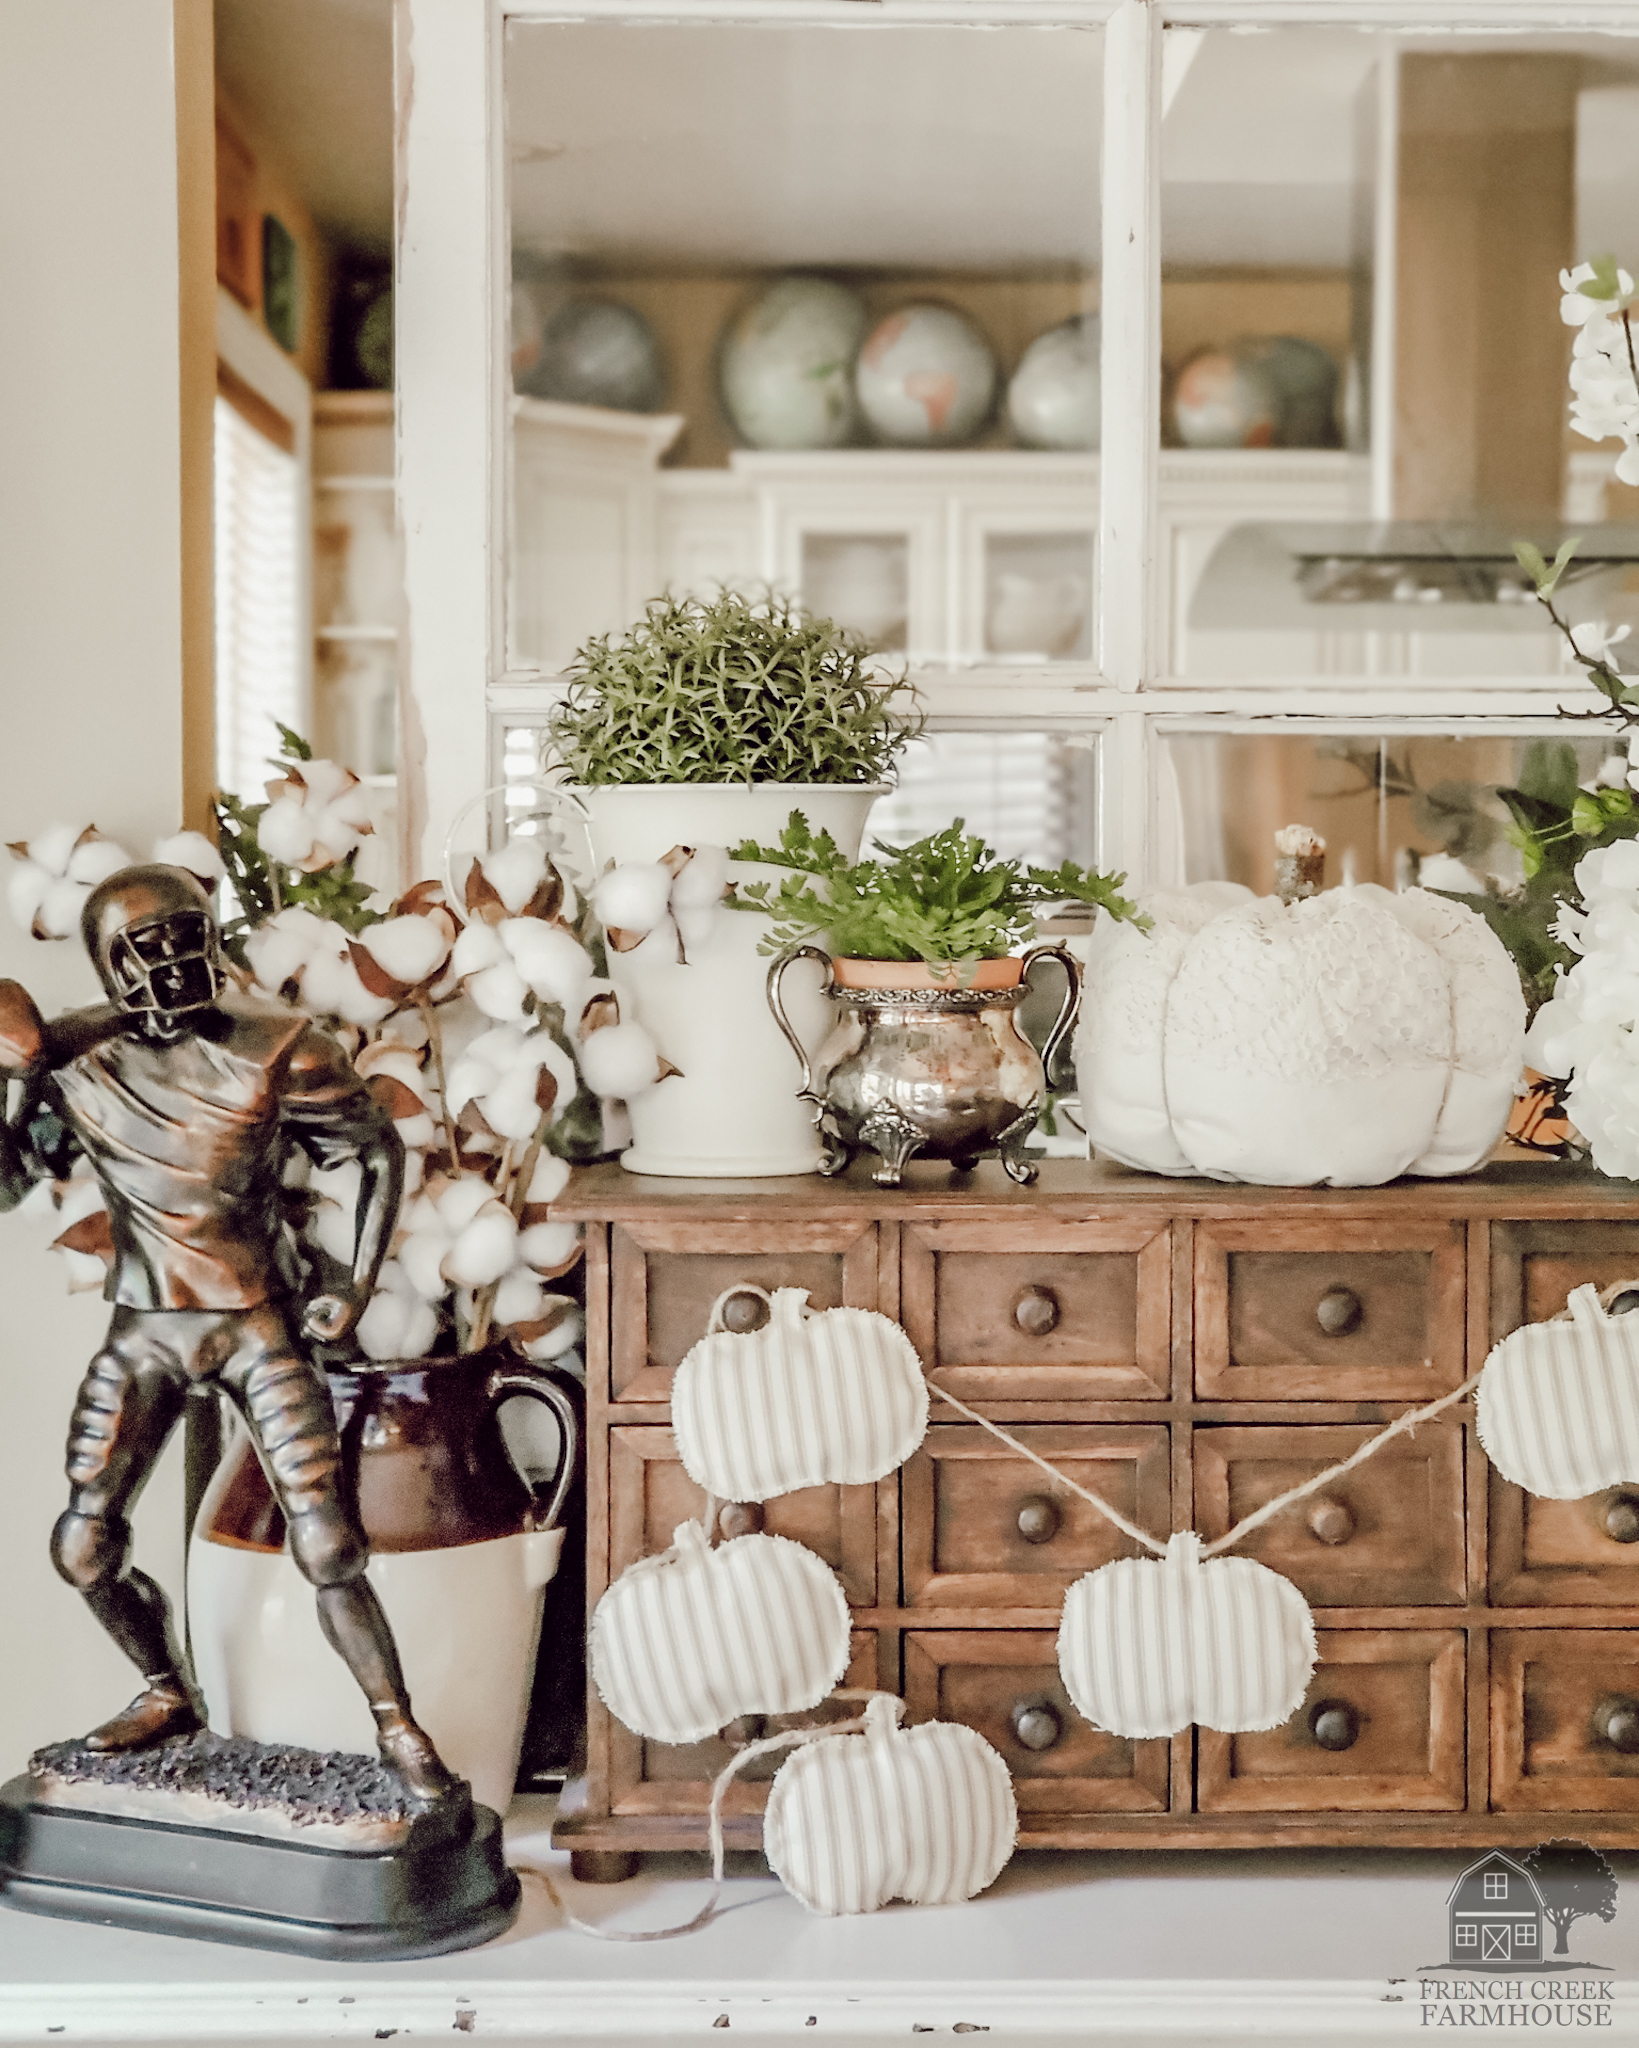 Football, pumpkins, and wood tones are perfect for fall